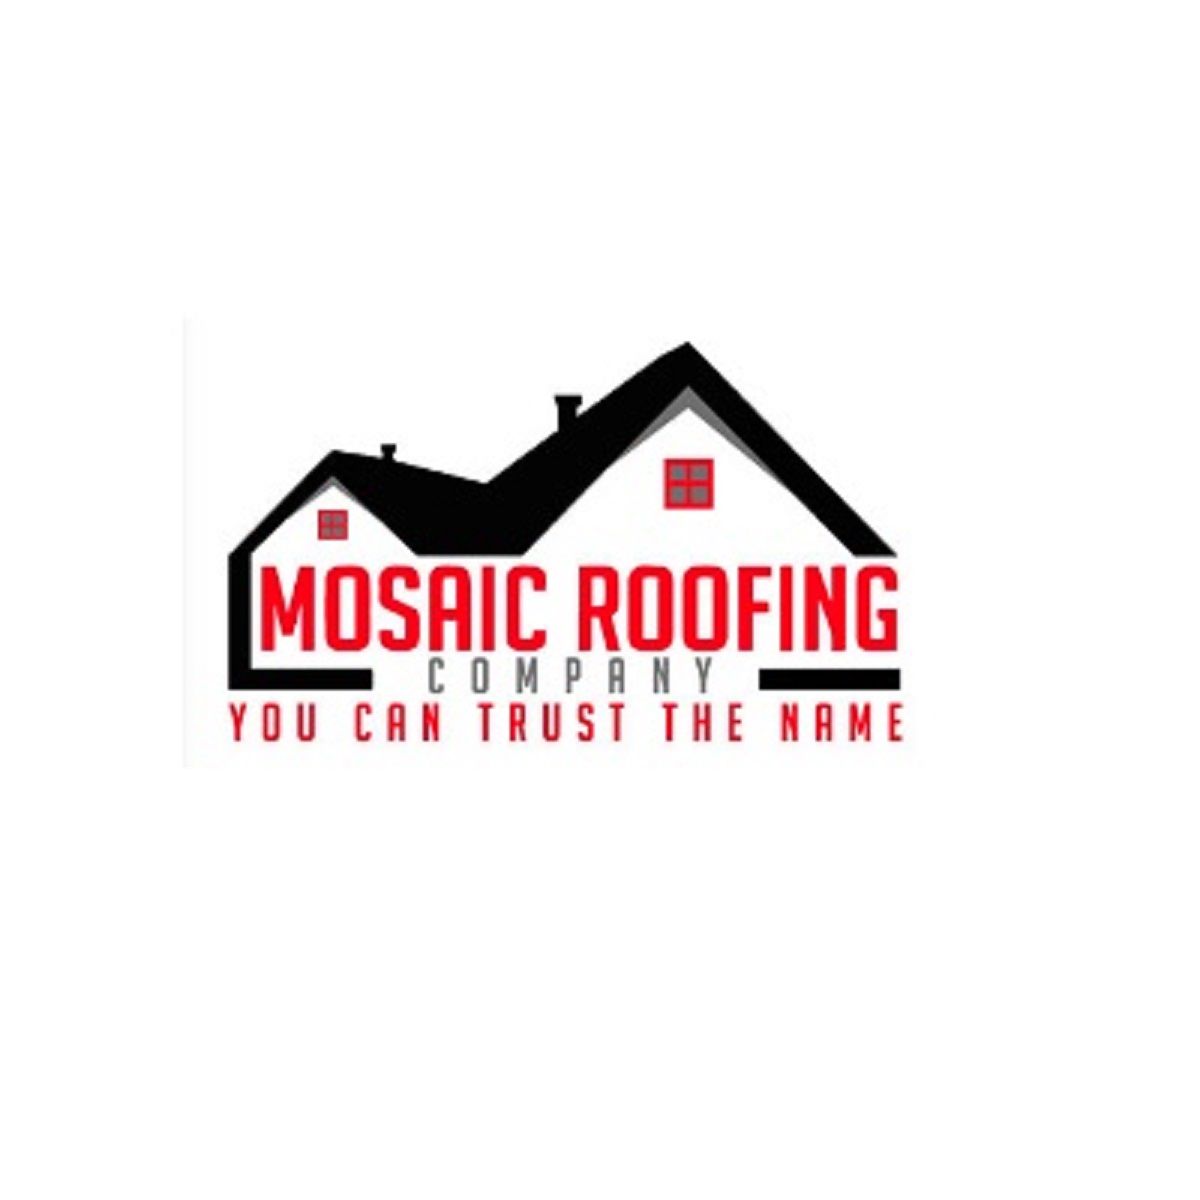 Mosaic Roofing Company Cover Image